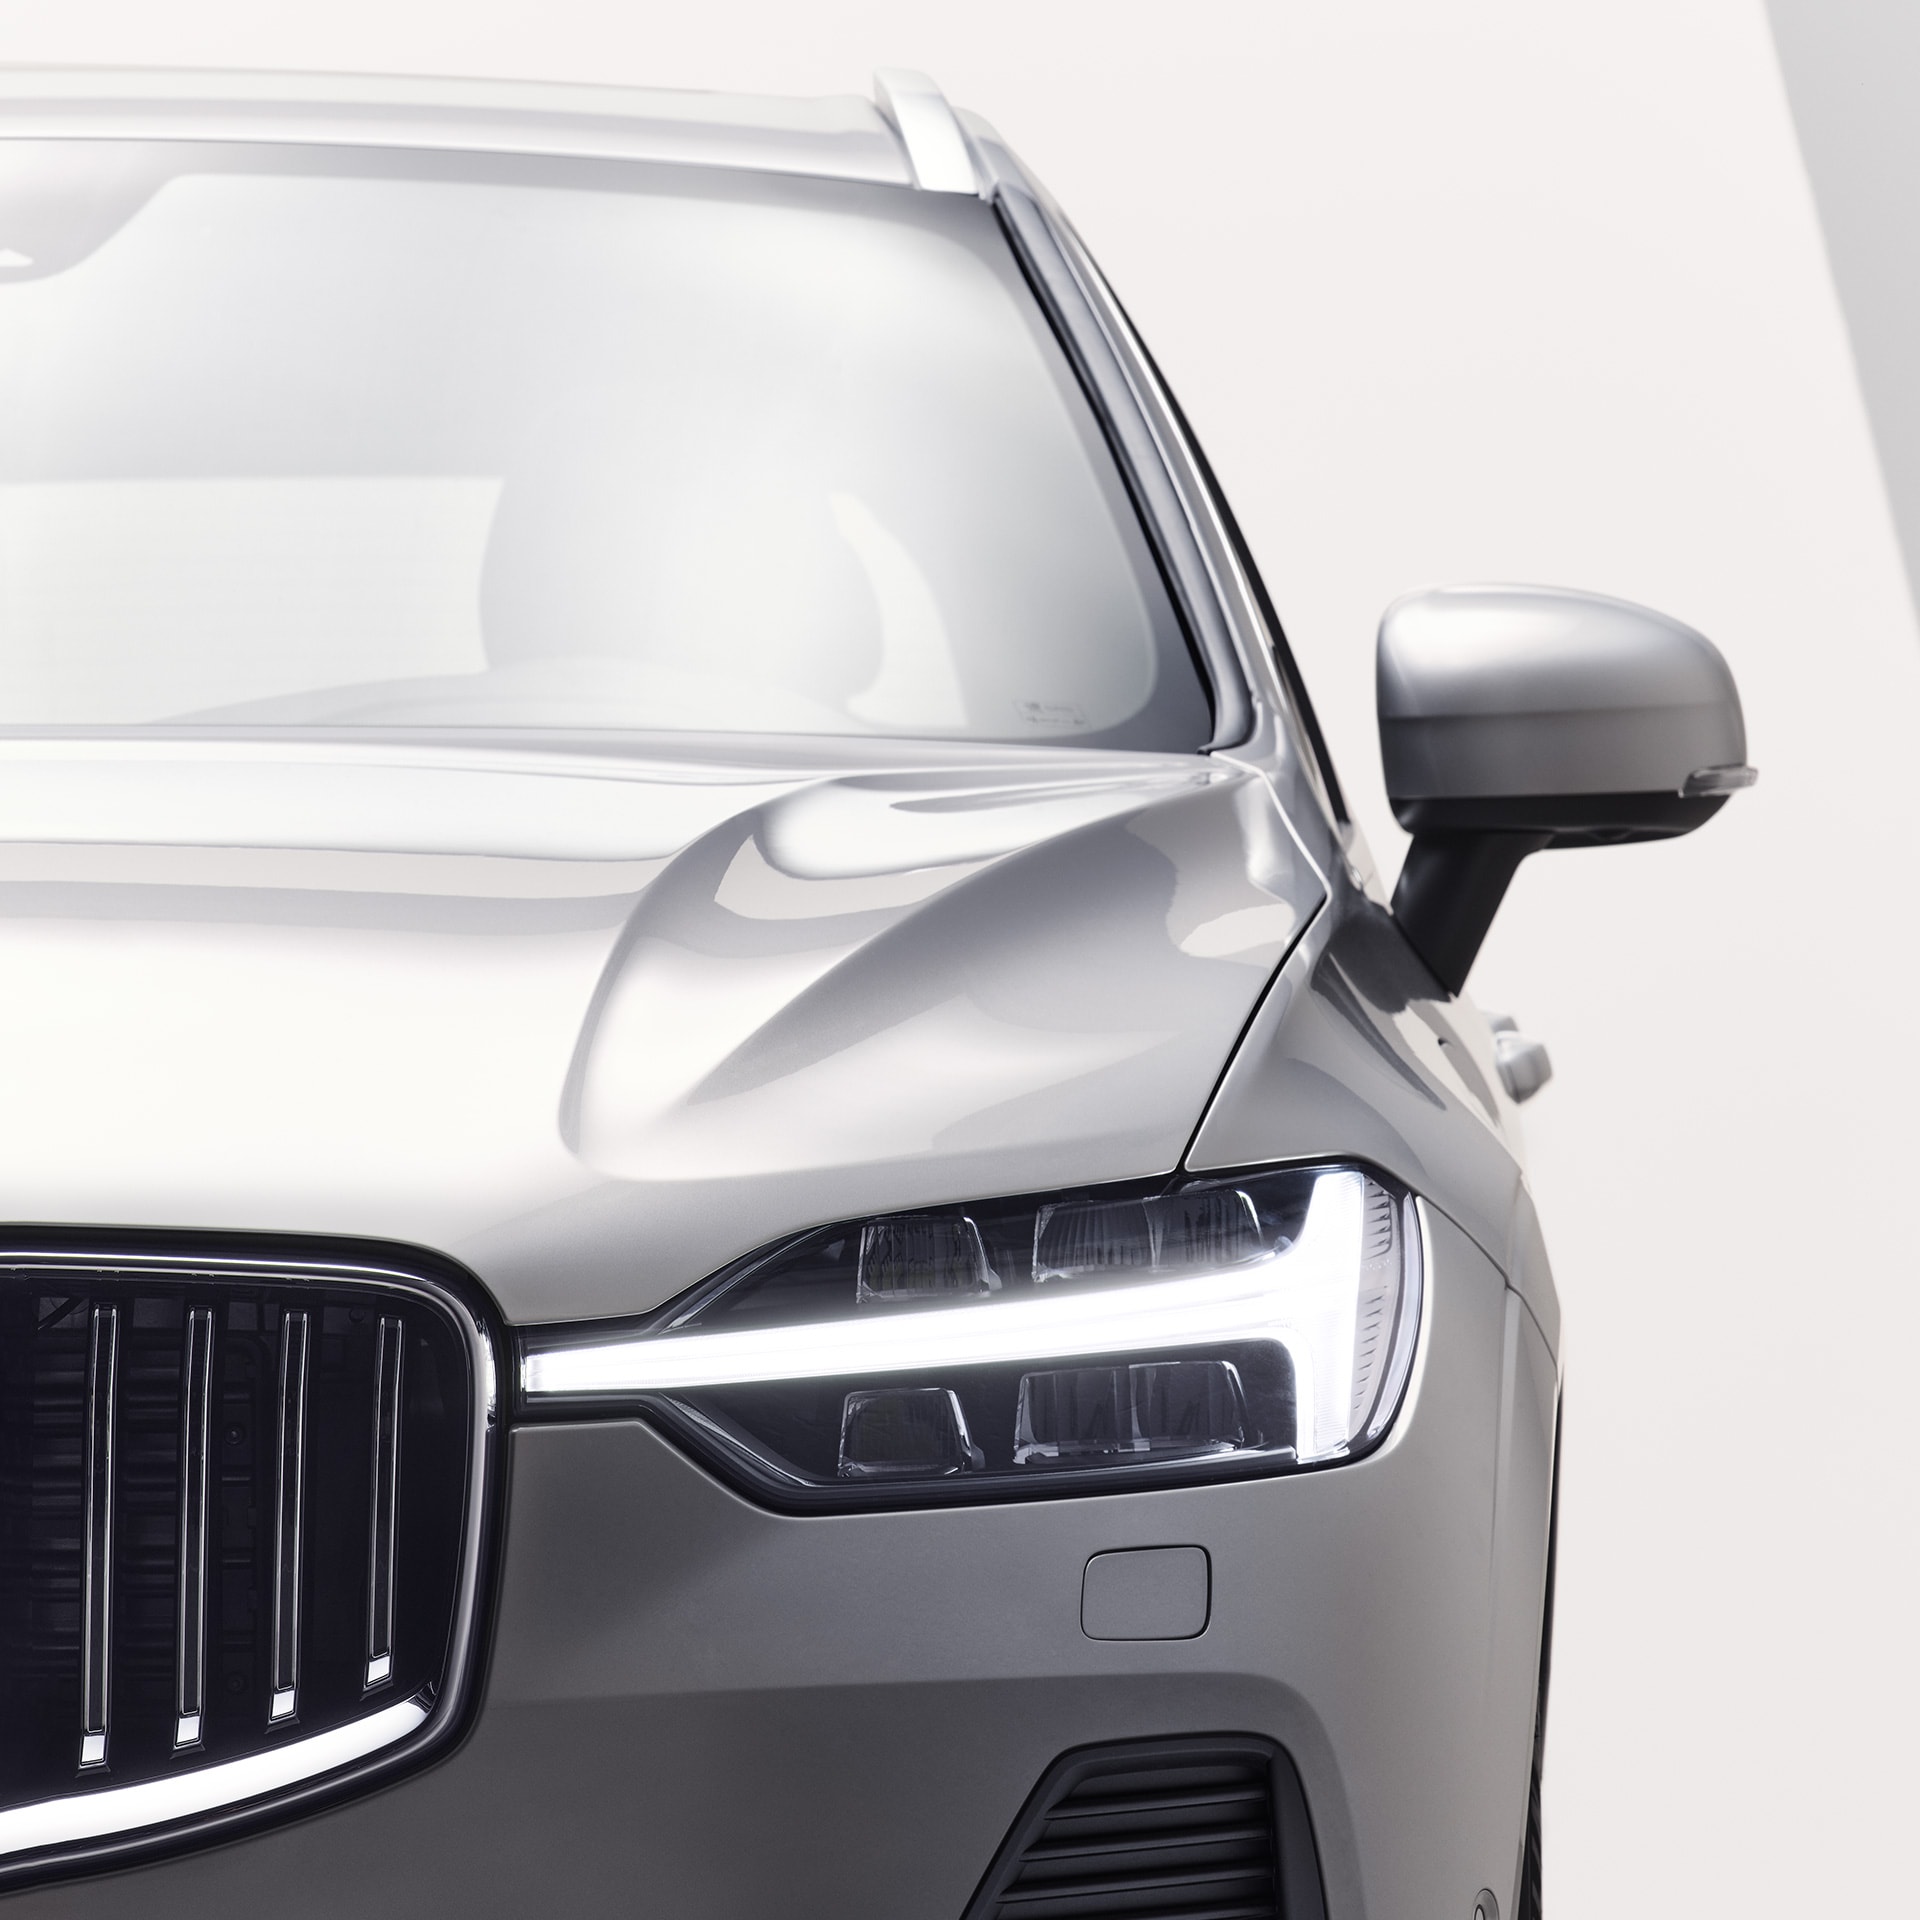 Front exterior of Volvo XC60 plug-in hybrid with the iconic front grille and headlamp design.